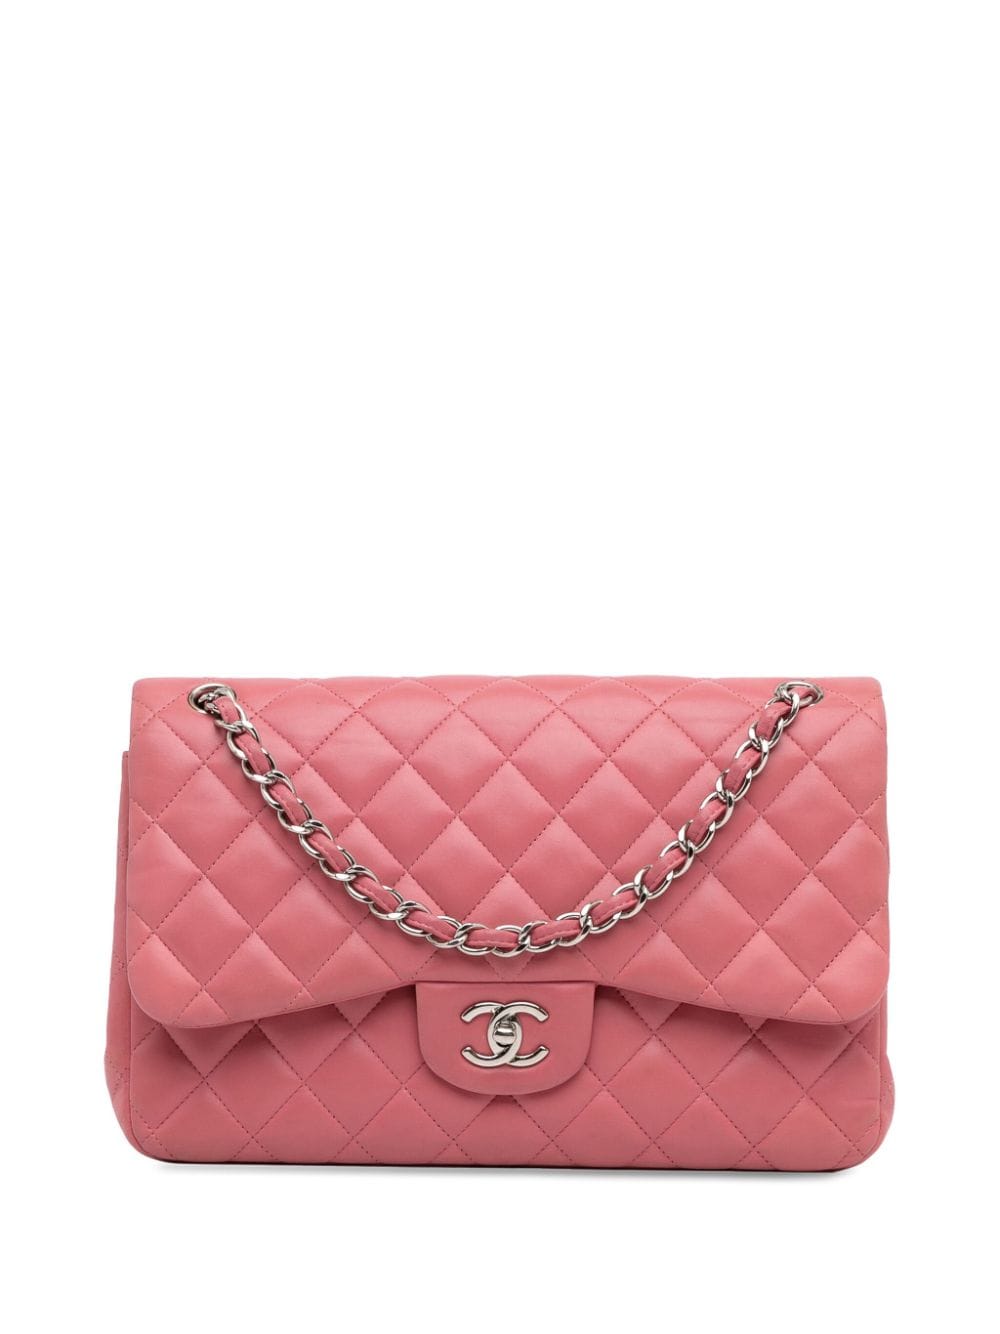 Pre-owned Chanel 2013-2014 Jumbo Classic Lambskin Double Flap Shoulder Bag In Pink